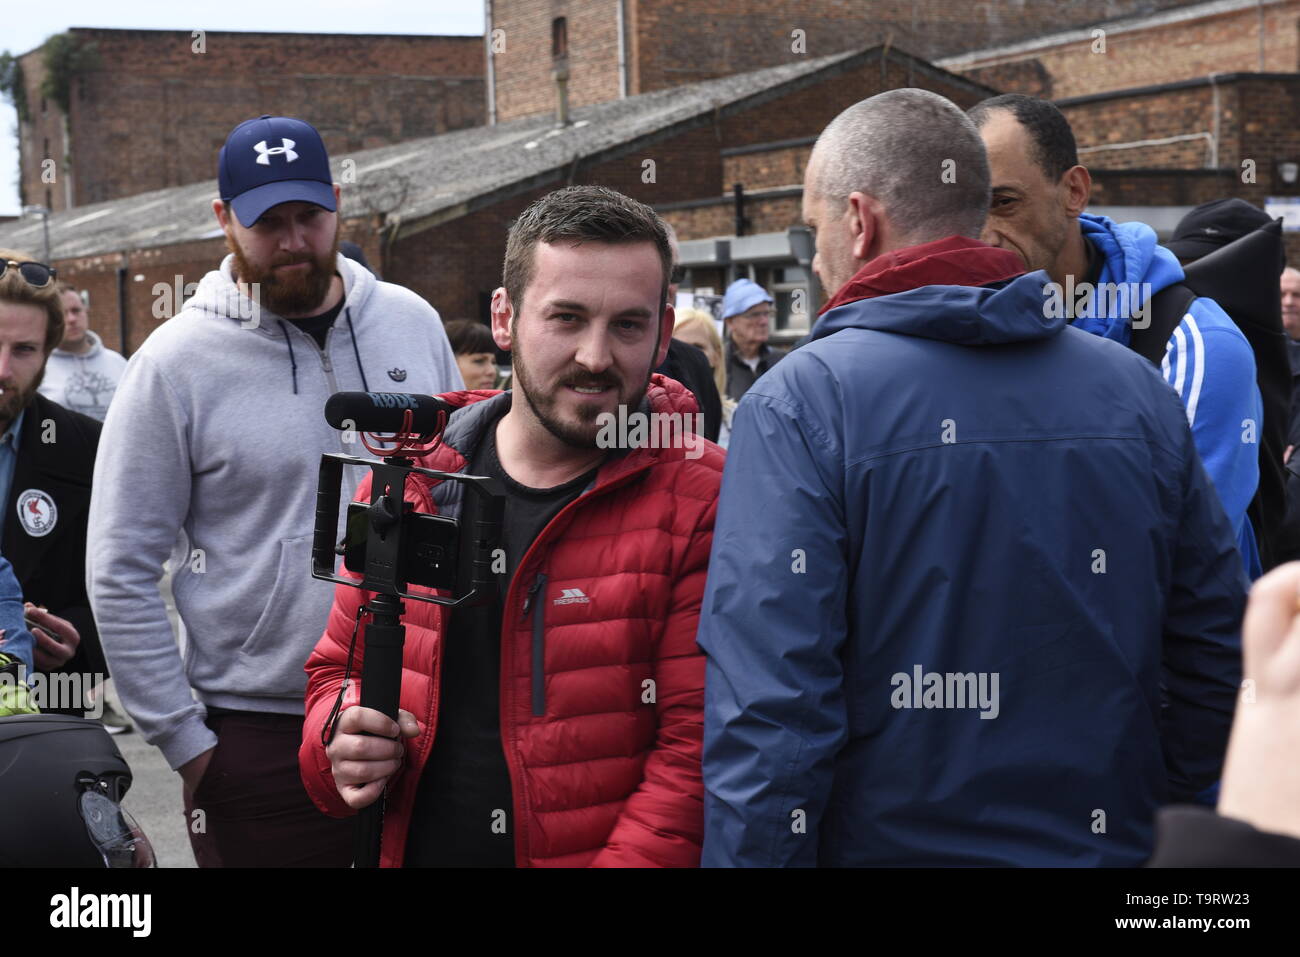 James Goddard hit the headlines in January 2019 after shouting abuse at MPs in Westminister. Here is in Liverpool filming anti-fascist protestors.  Police kept supporters and counter-demonstrators apart but clashed with counter-demonstrators ahead of Tommy Robinson's arrival. Credit David J Colbran Stock Photo